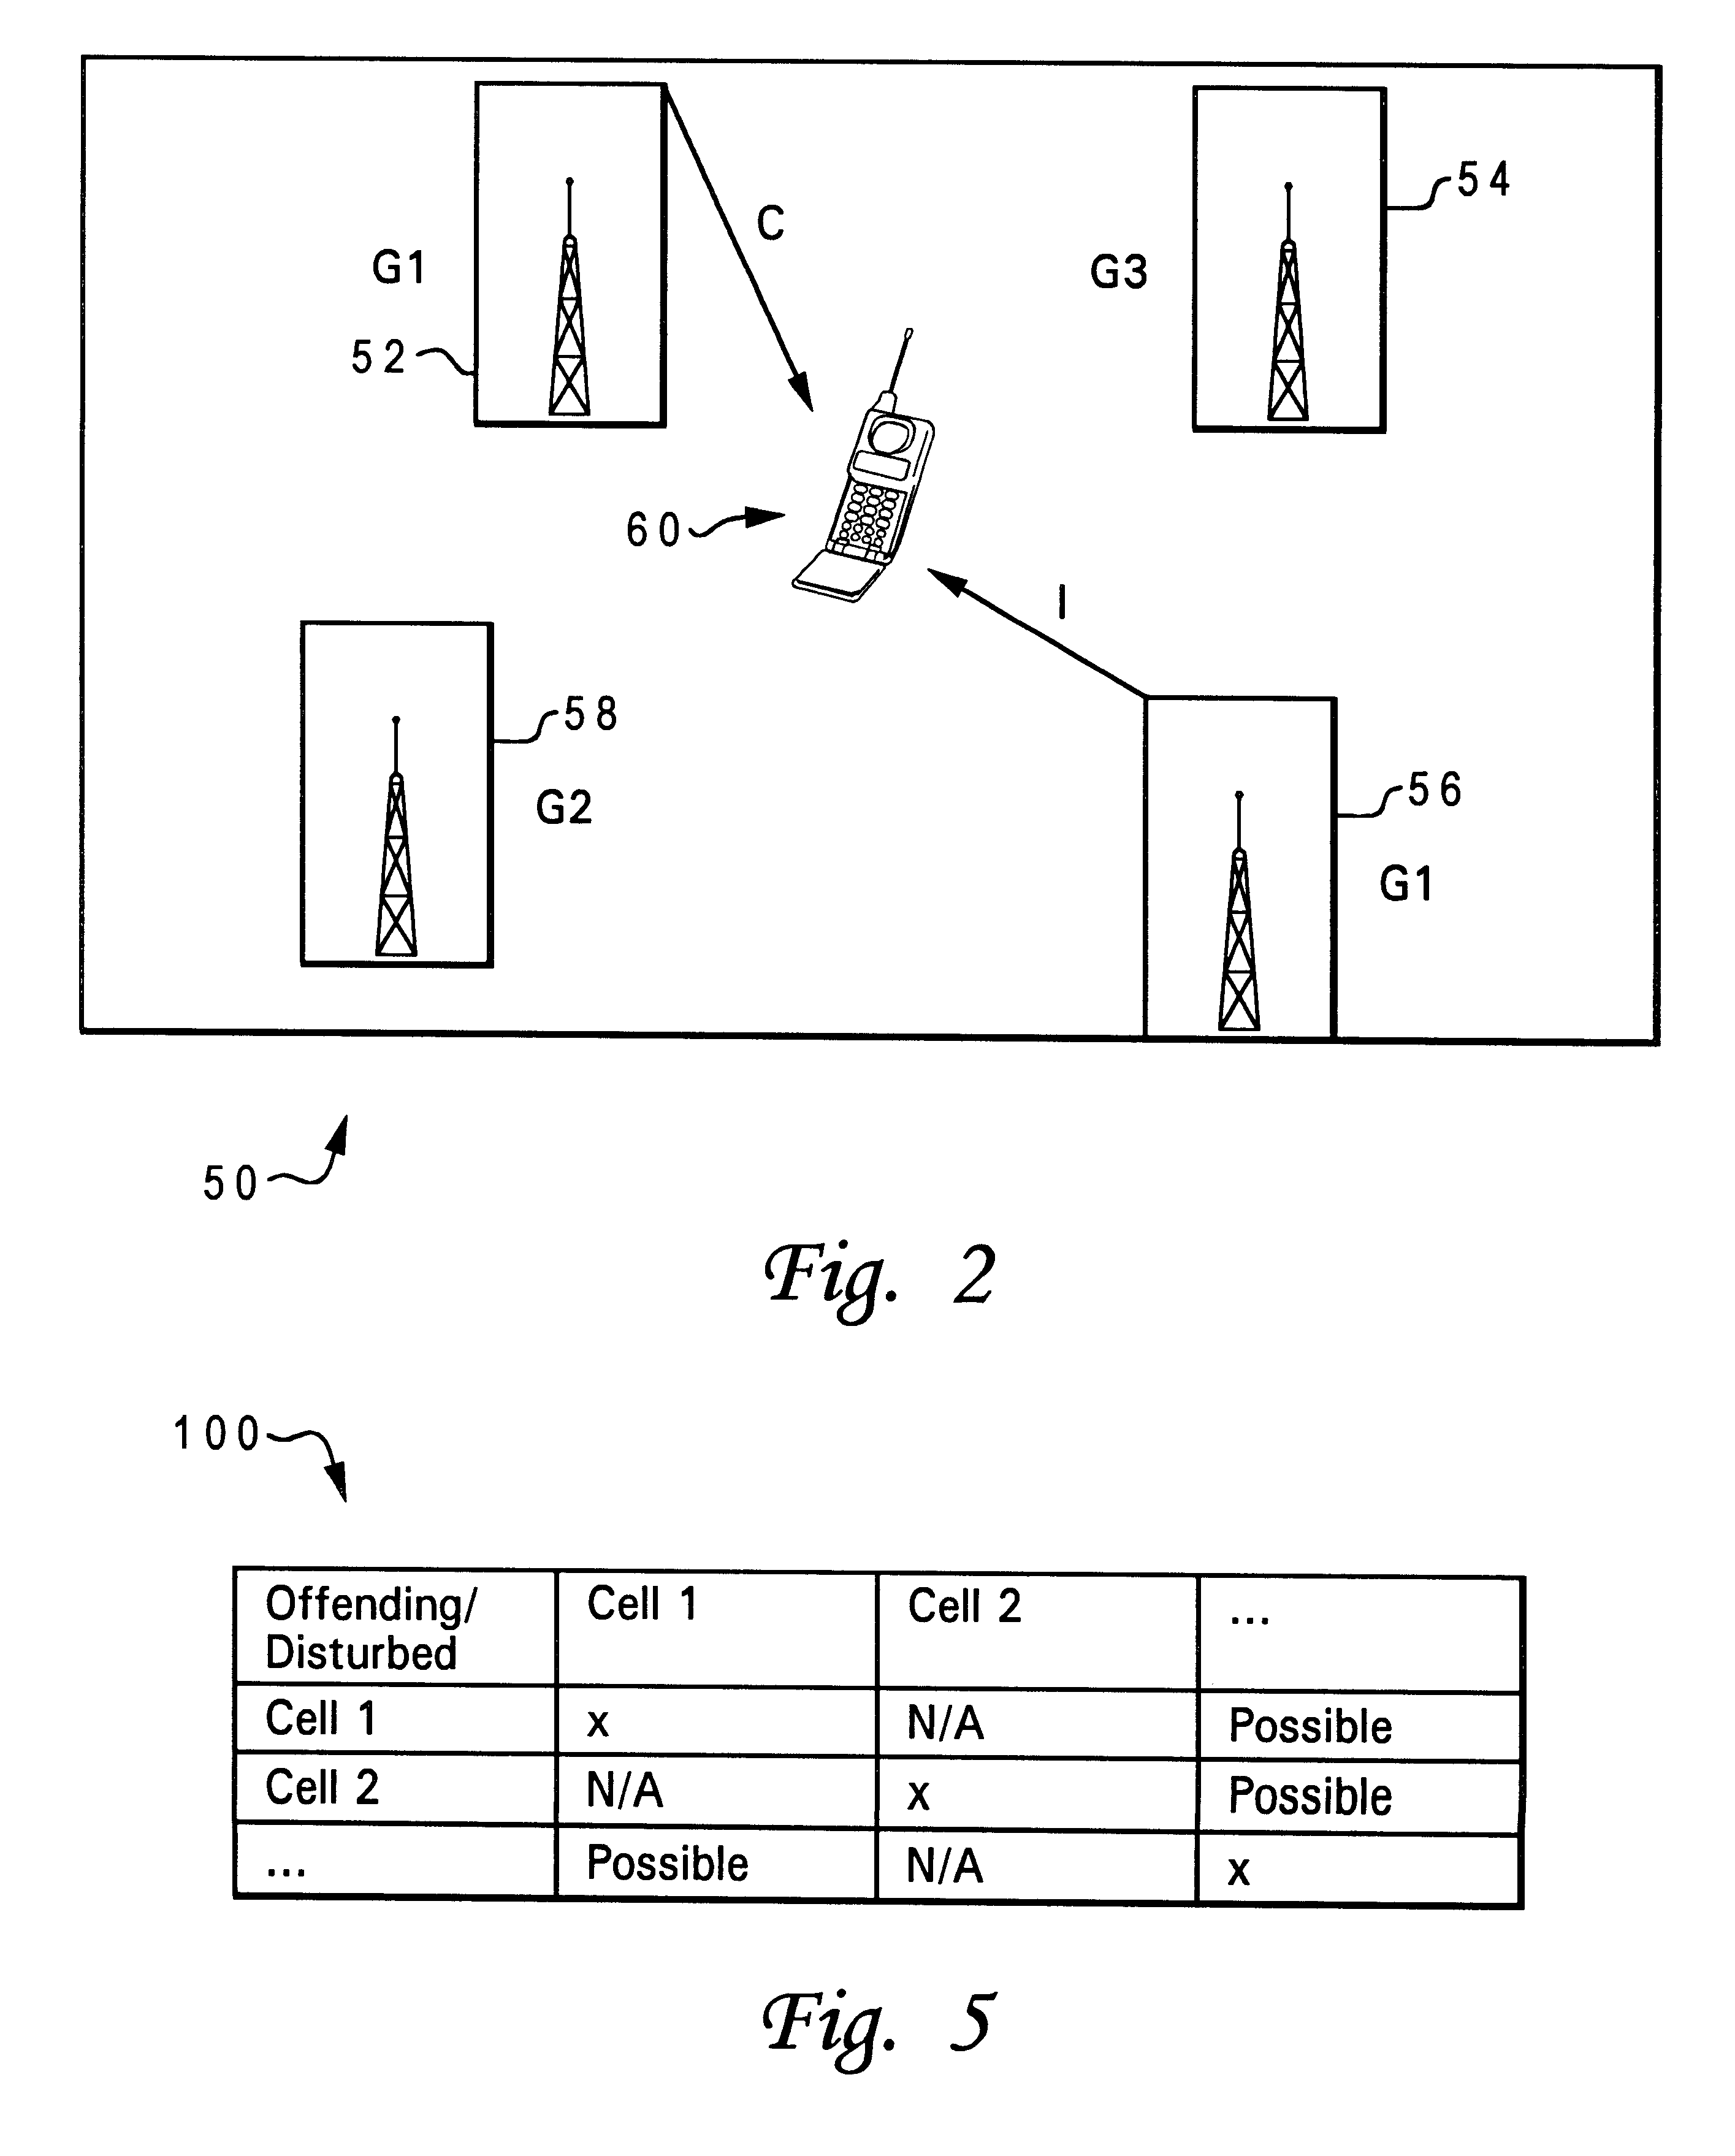 Method and system for identifying and analyzing downlink interference sources in a telecommunications network